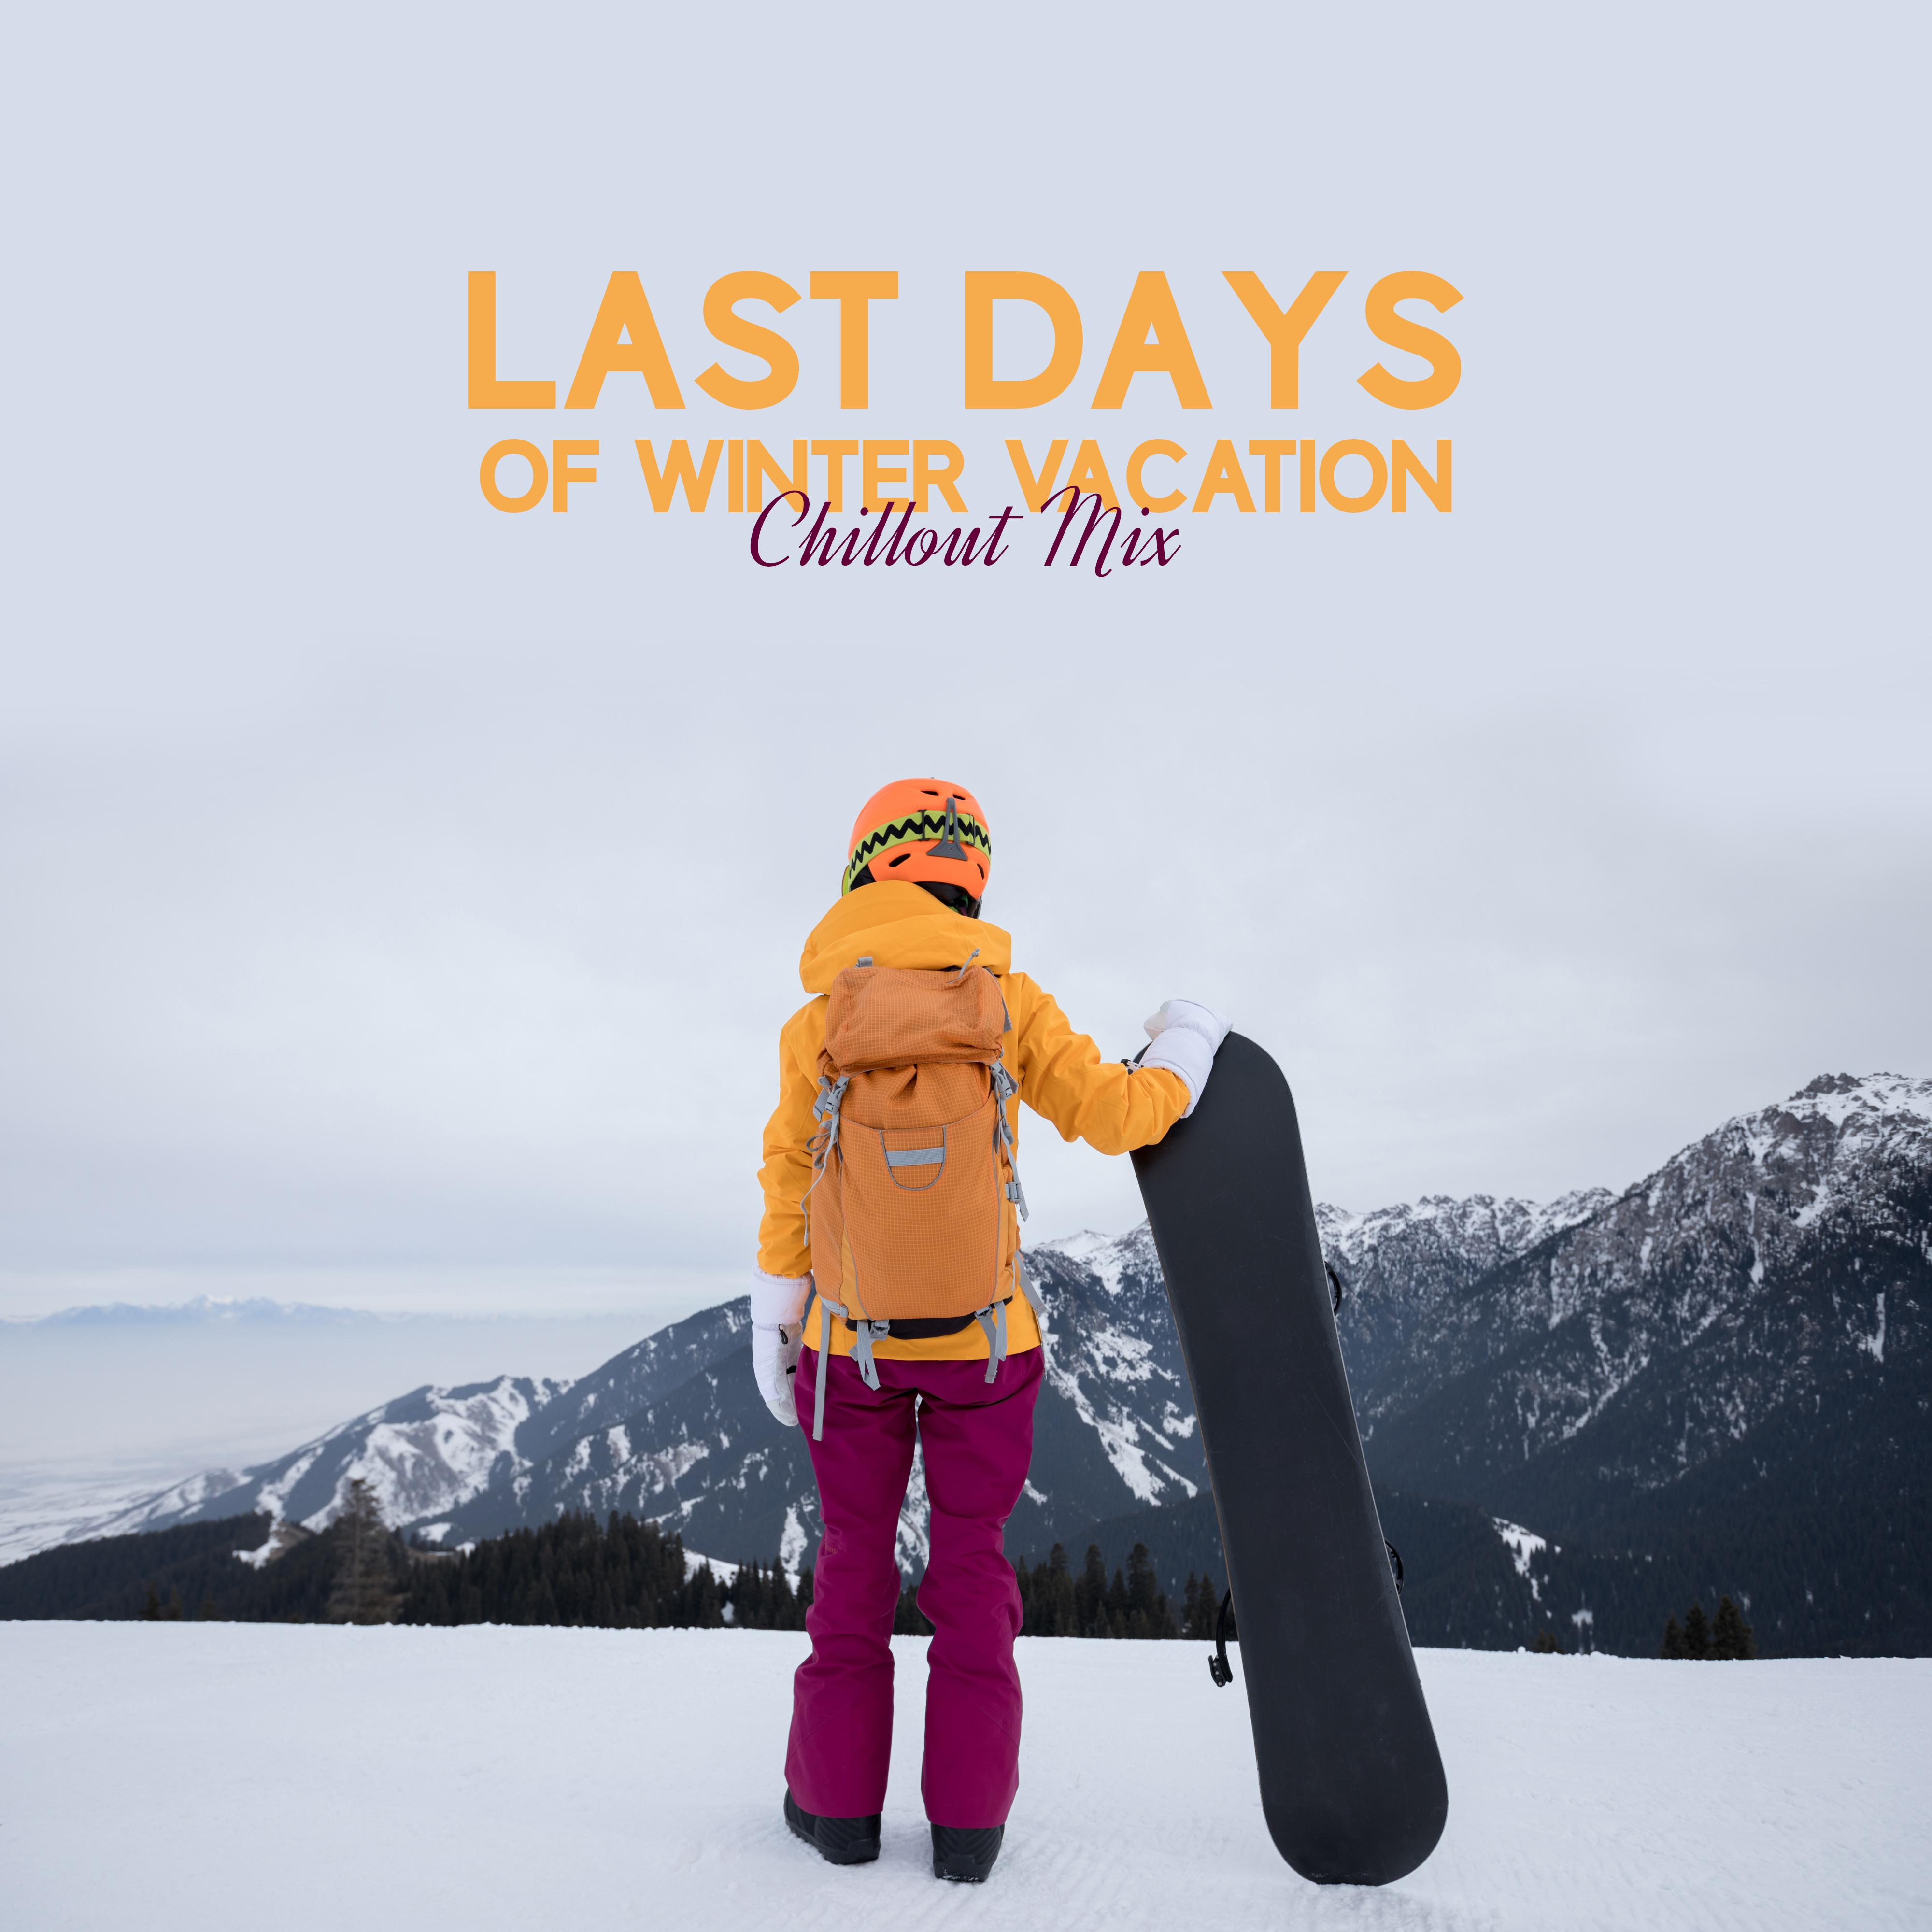 Last Days of Winter Vacation Chillout Mix: Top 2019 Electronic Music for Total Relax, Snowy Beats, Calming Down, Chill Out in the Mountains